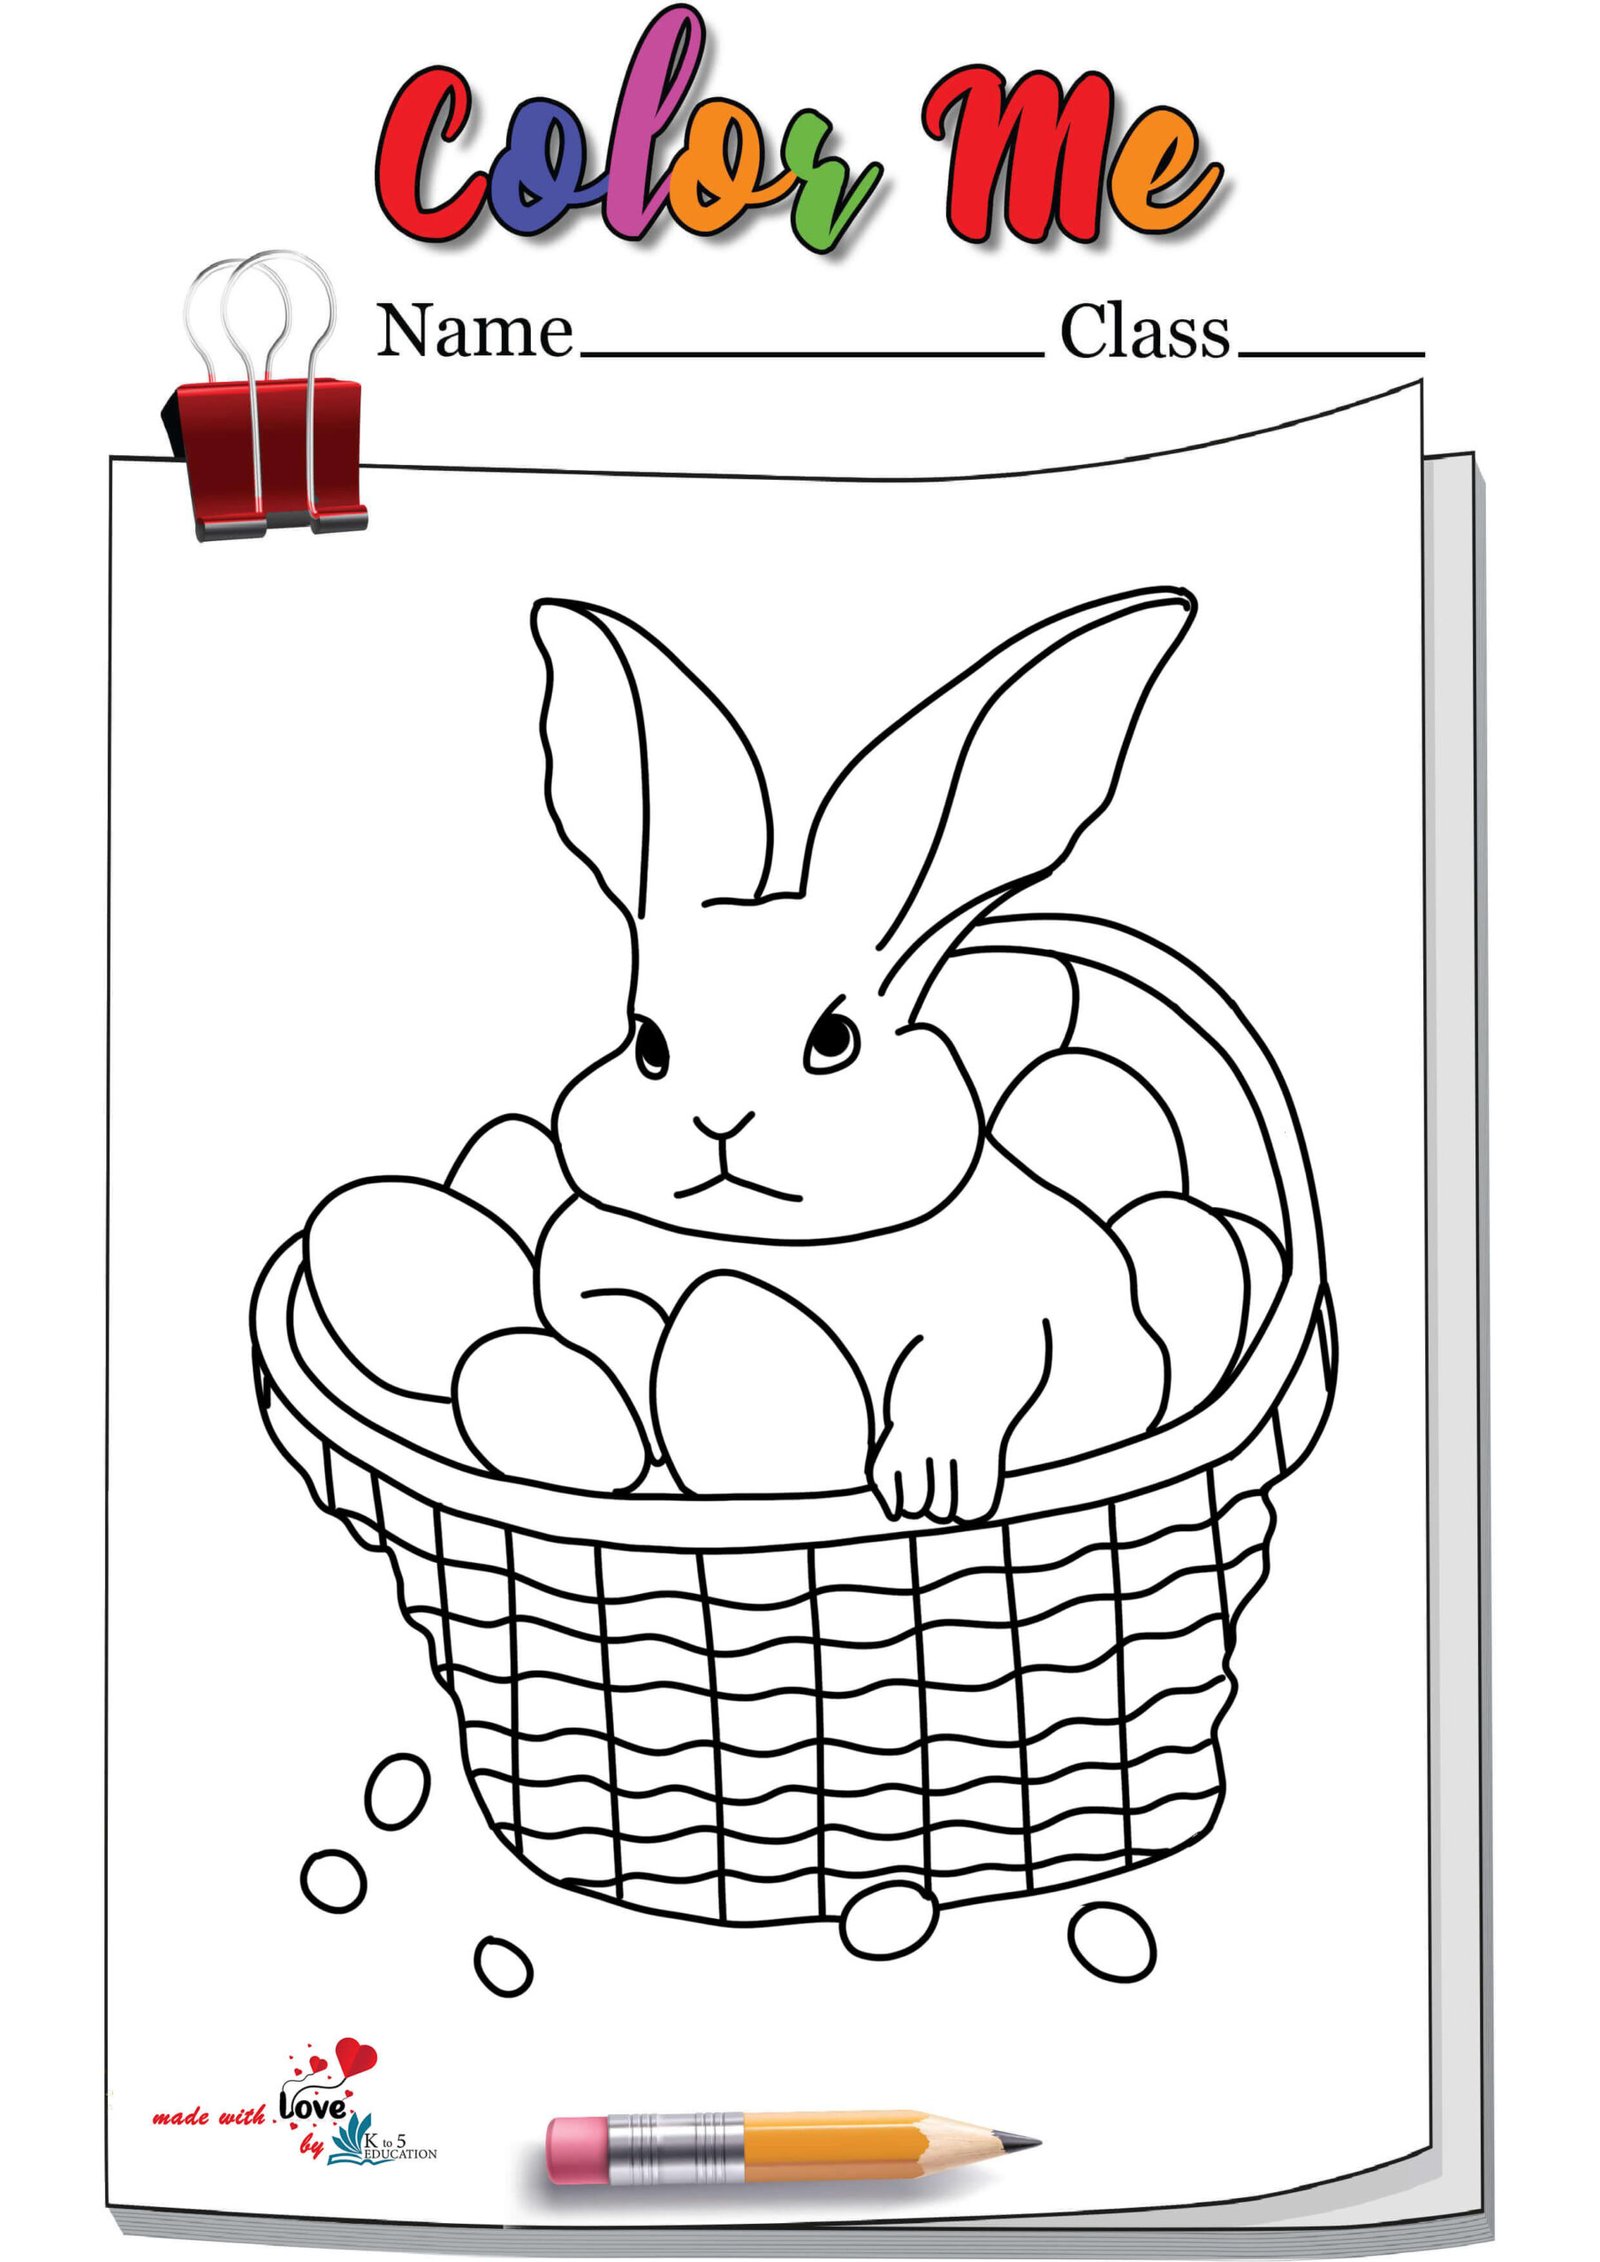 Angry Easter Bunny Coloring Page